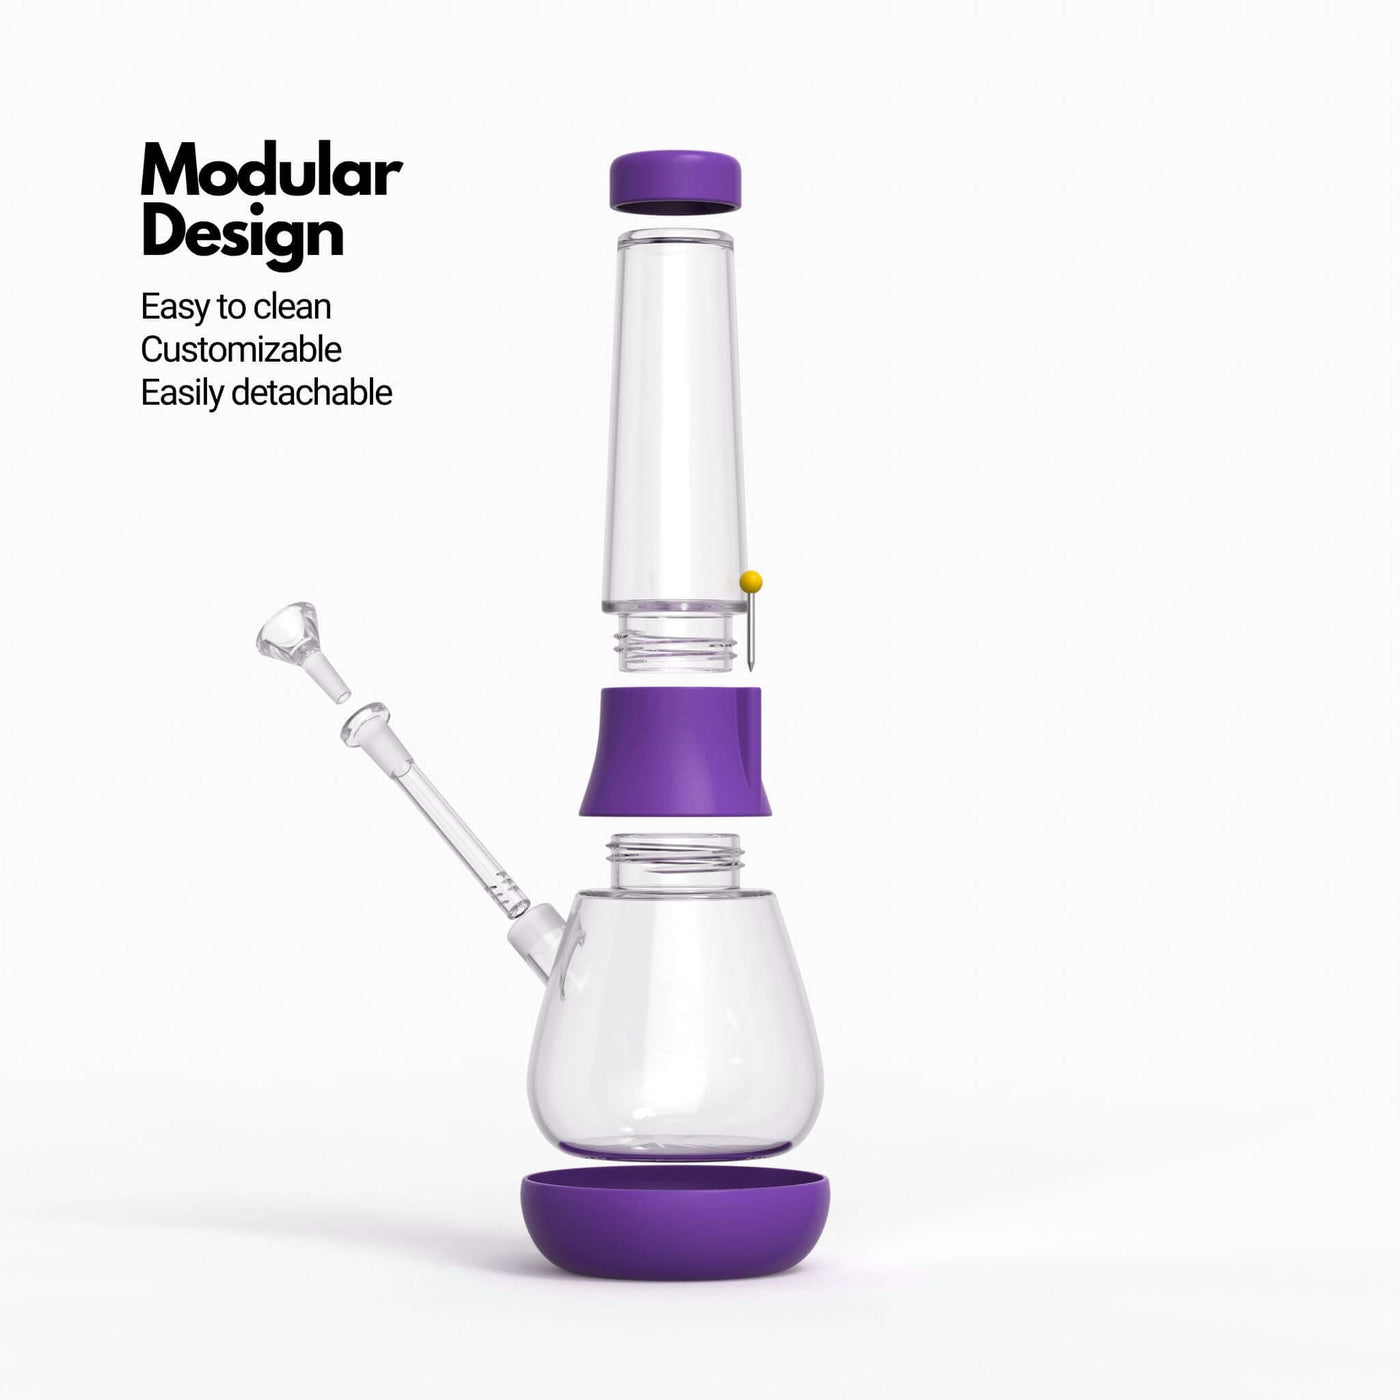 Exploded view infographic of Weeday modular glass bong in grape purple silicone covers, highlighting its customizable and detachable features.